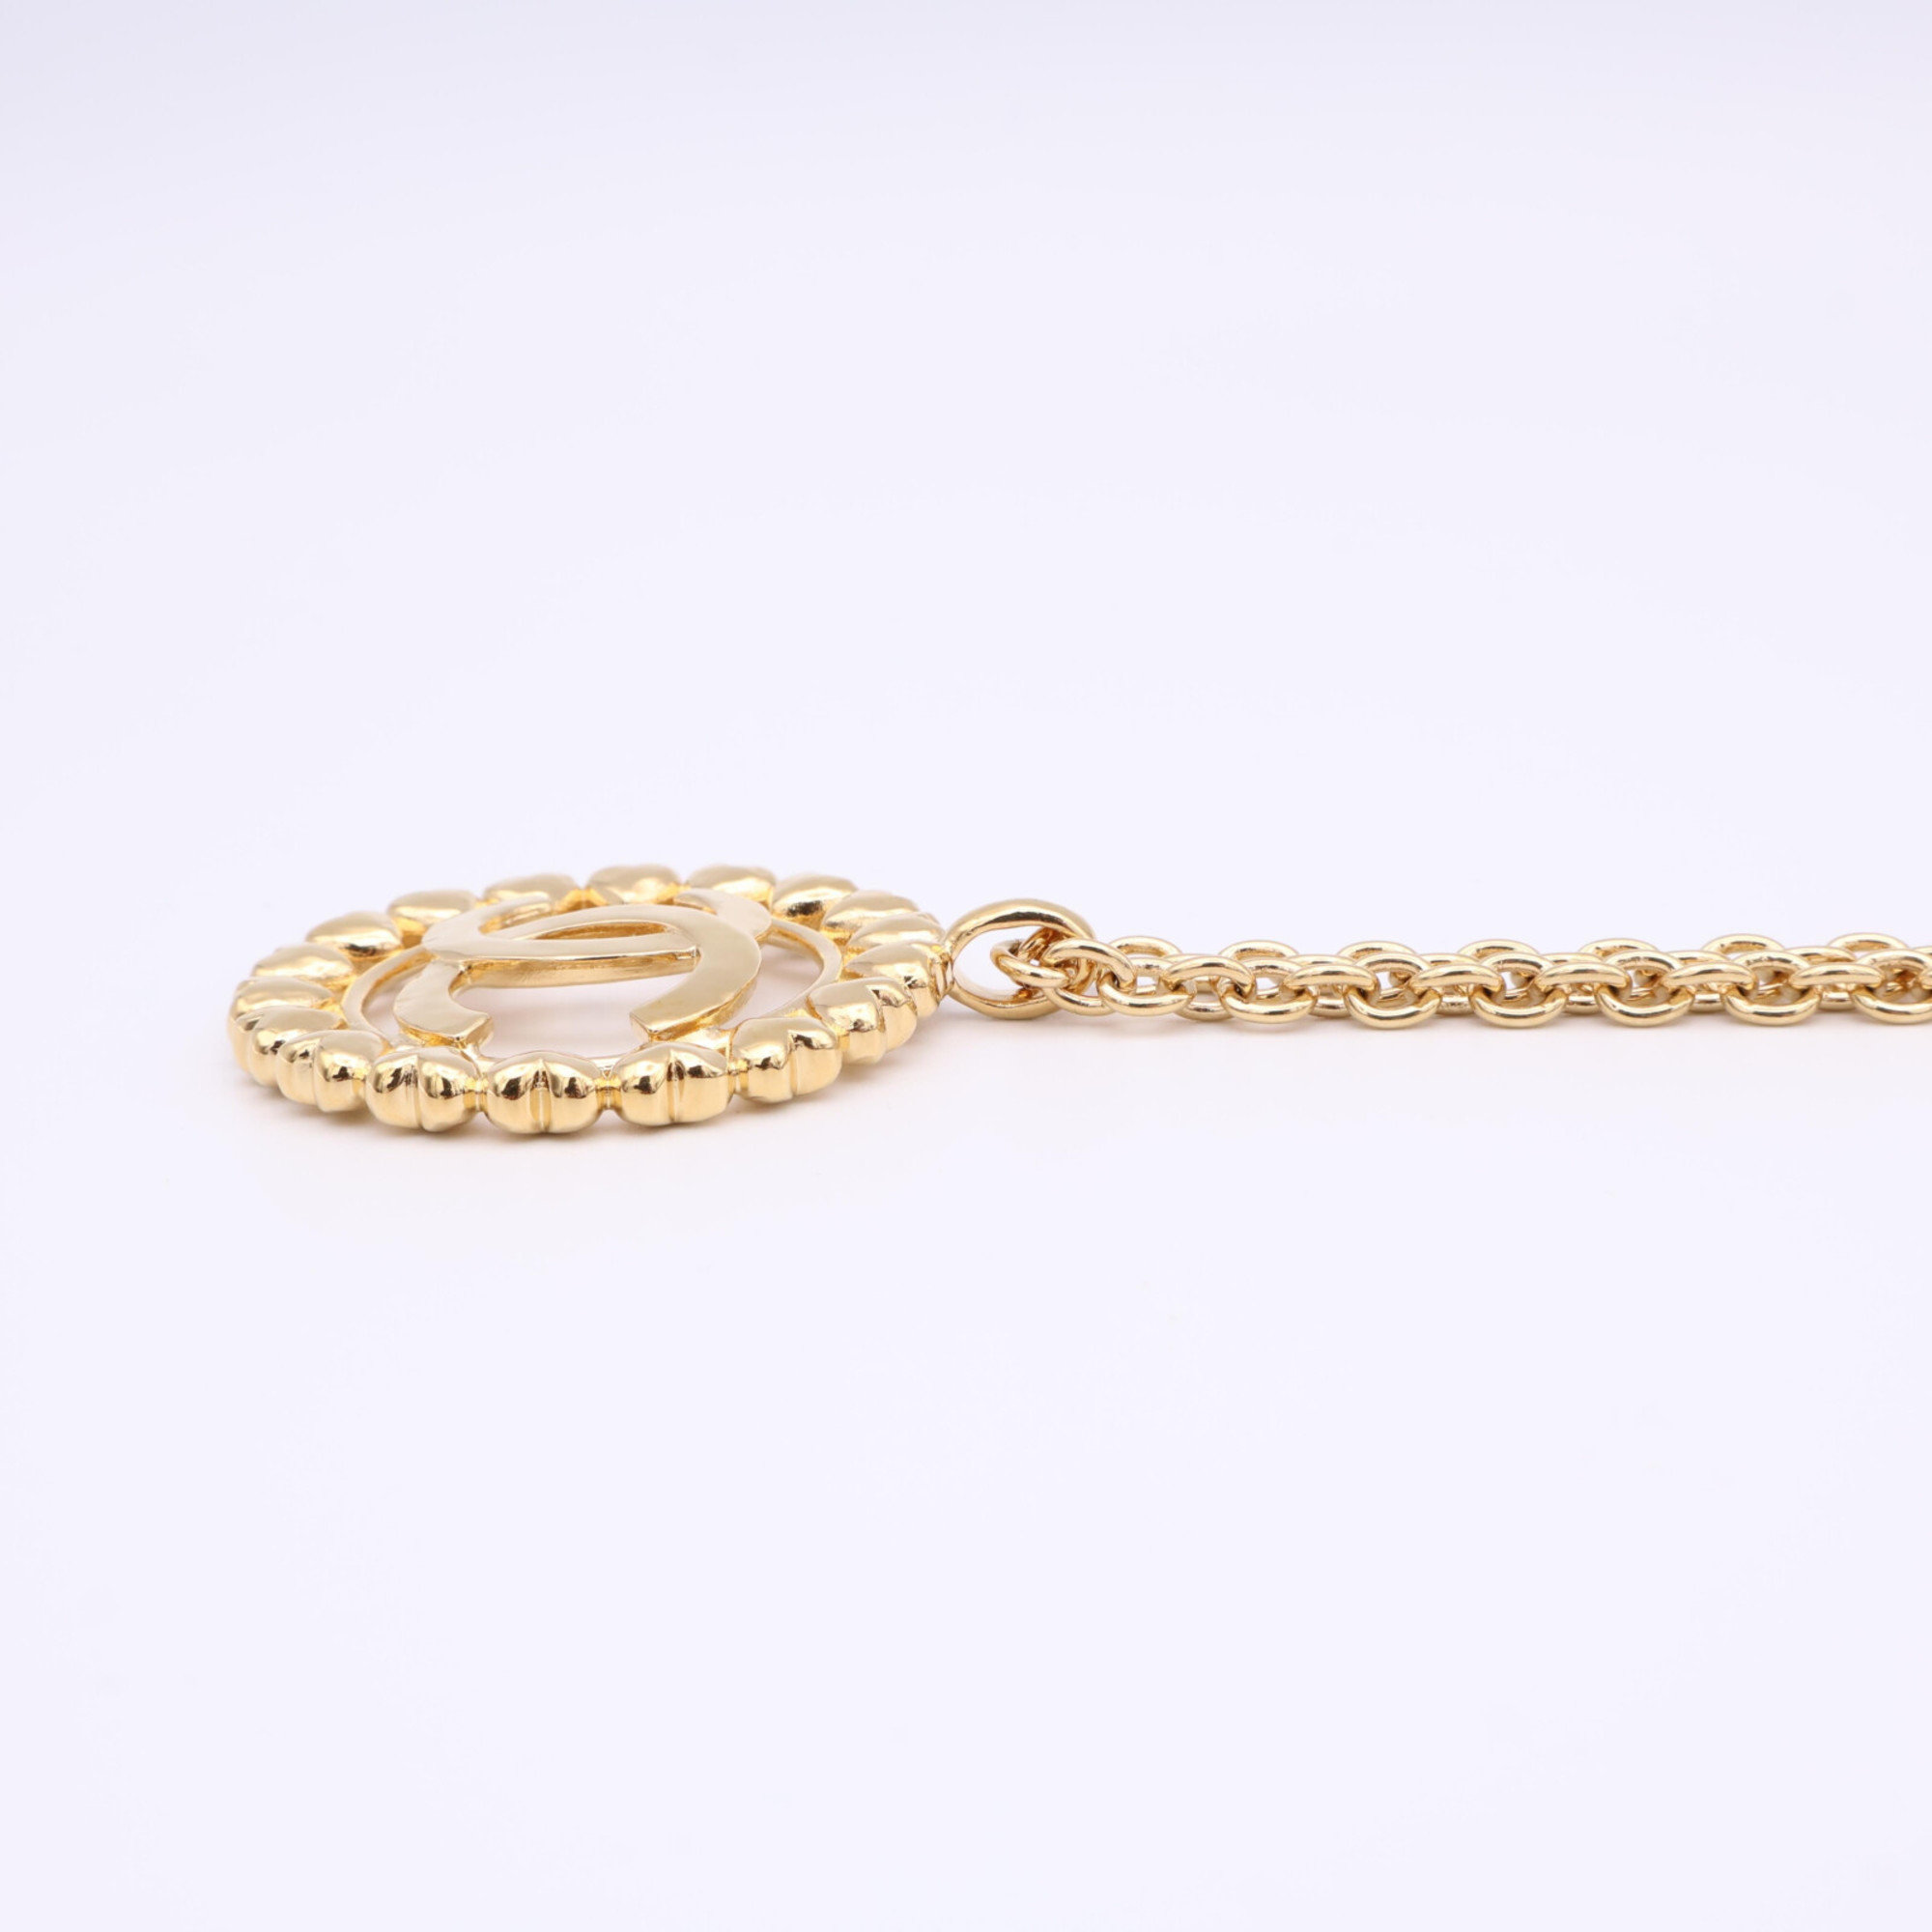 CHANEL L23P Coco Mark Heart Round Circle Pendant Long Necklace Yellow Gold Women's